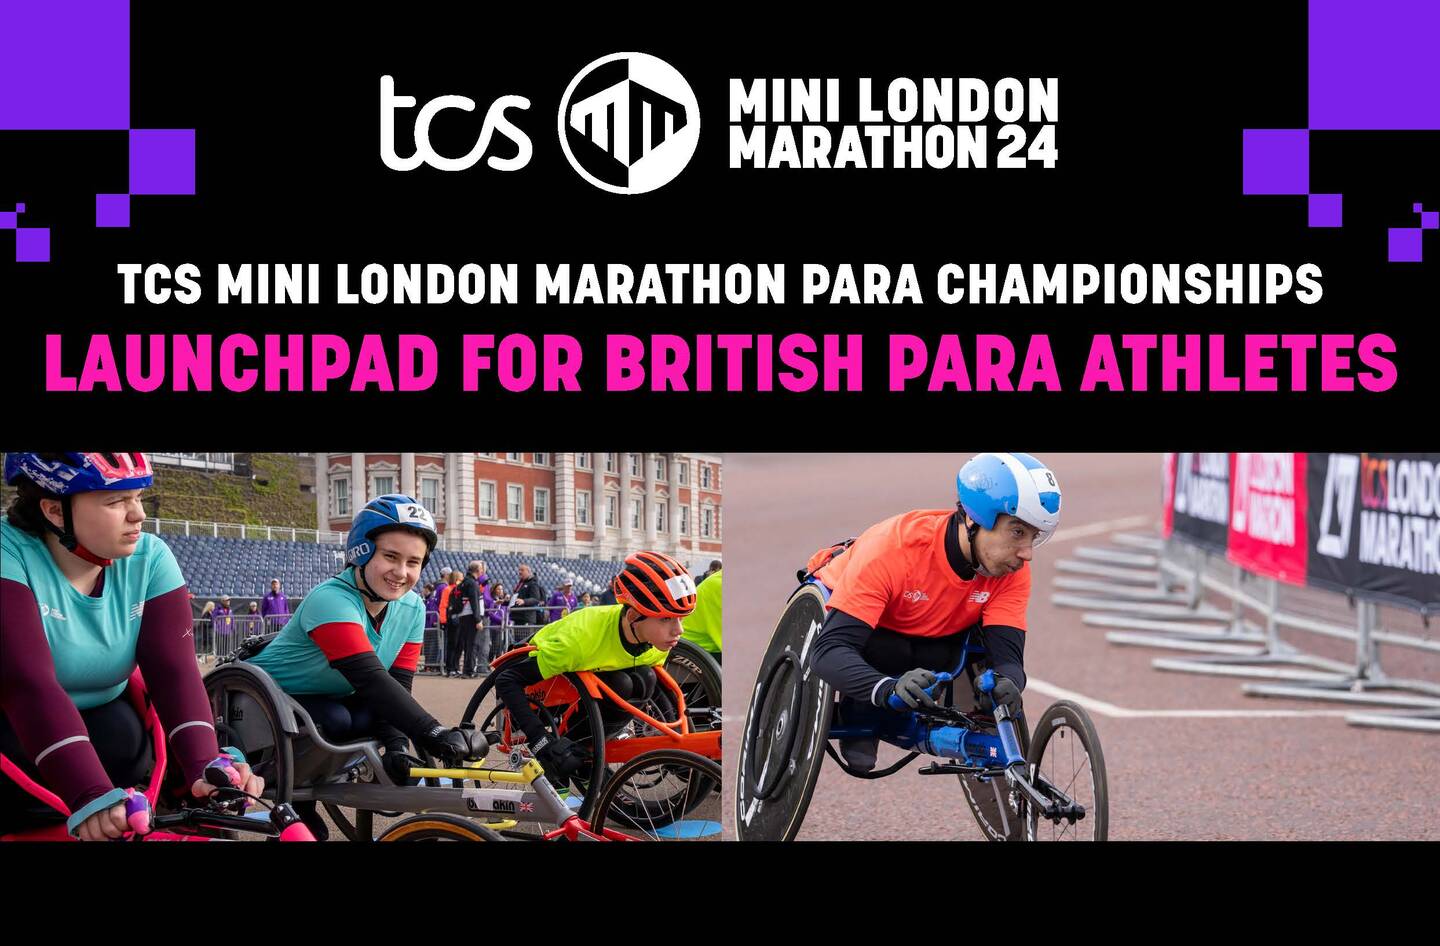 Advert for Mini London Marathon Para Championships. Image shows athletes taking part in wheelchair road races.